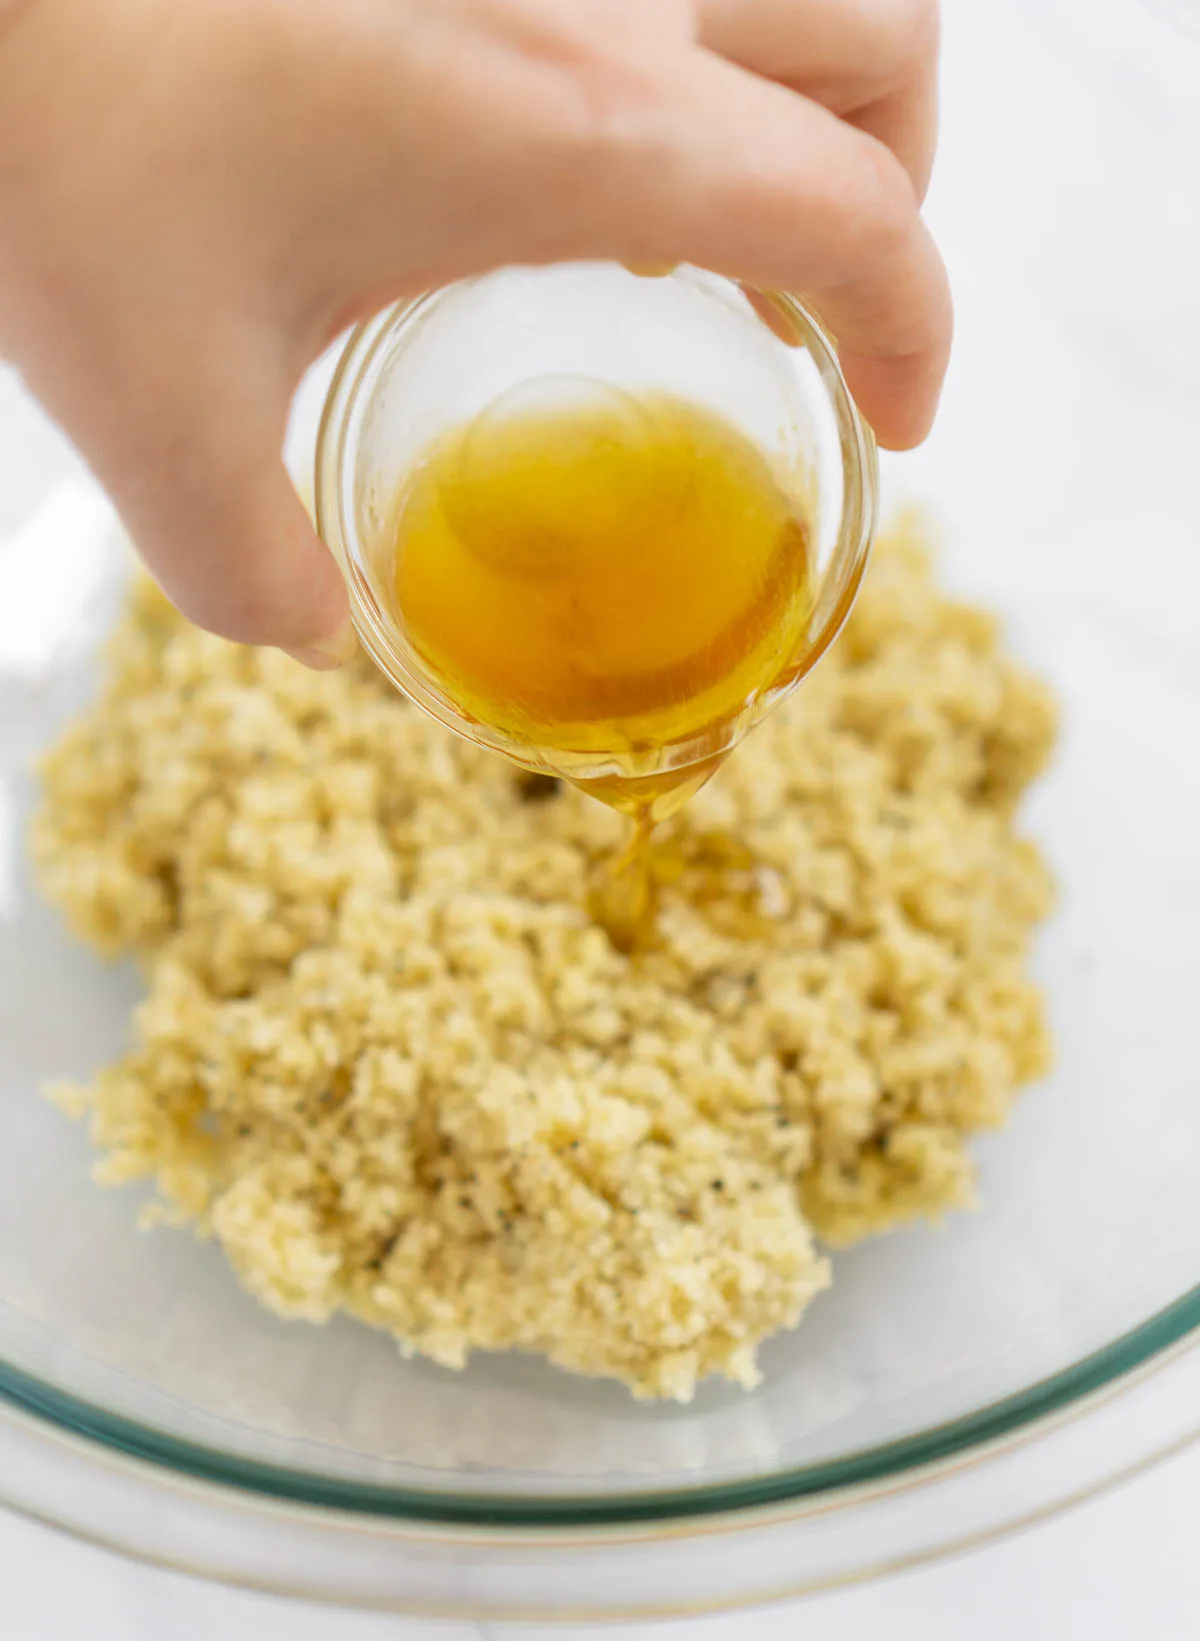 Adding lemon juice, maple syrup, and olive oil to couscous